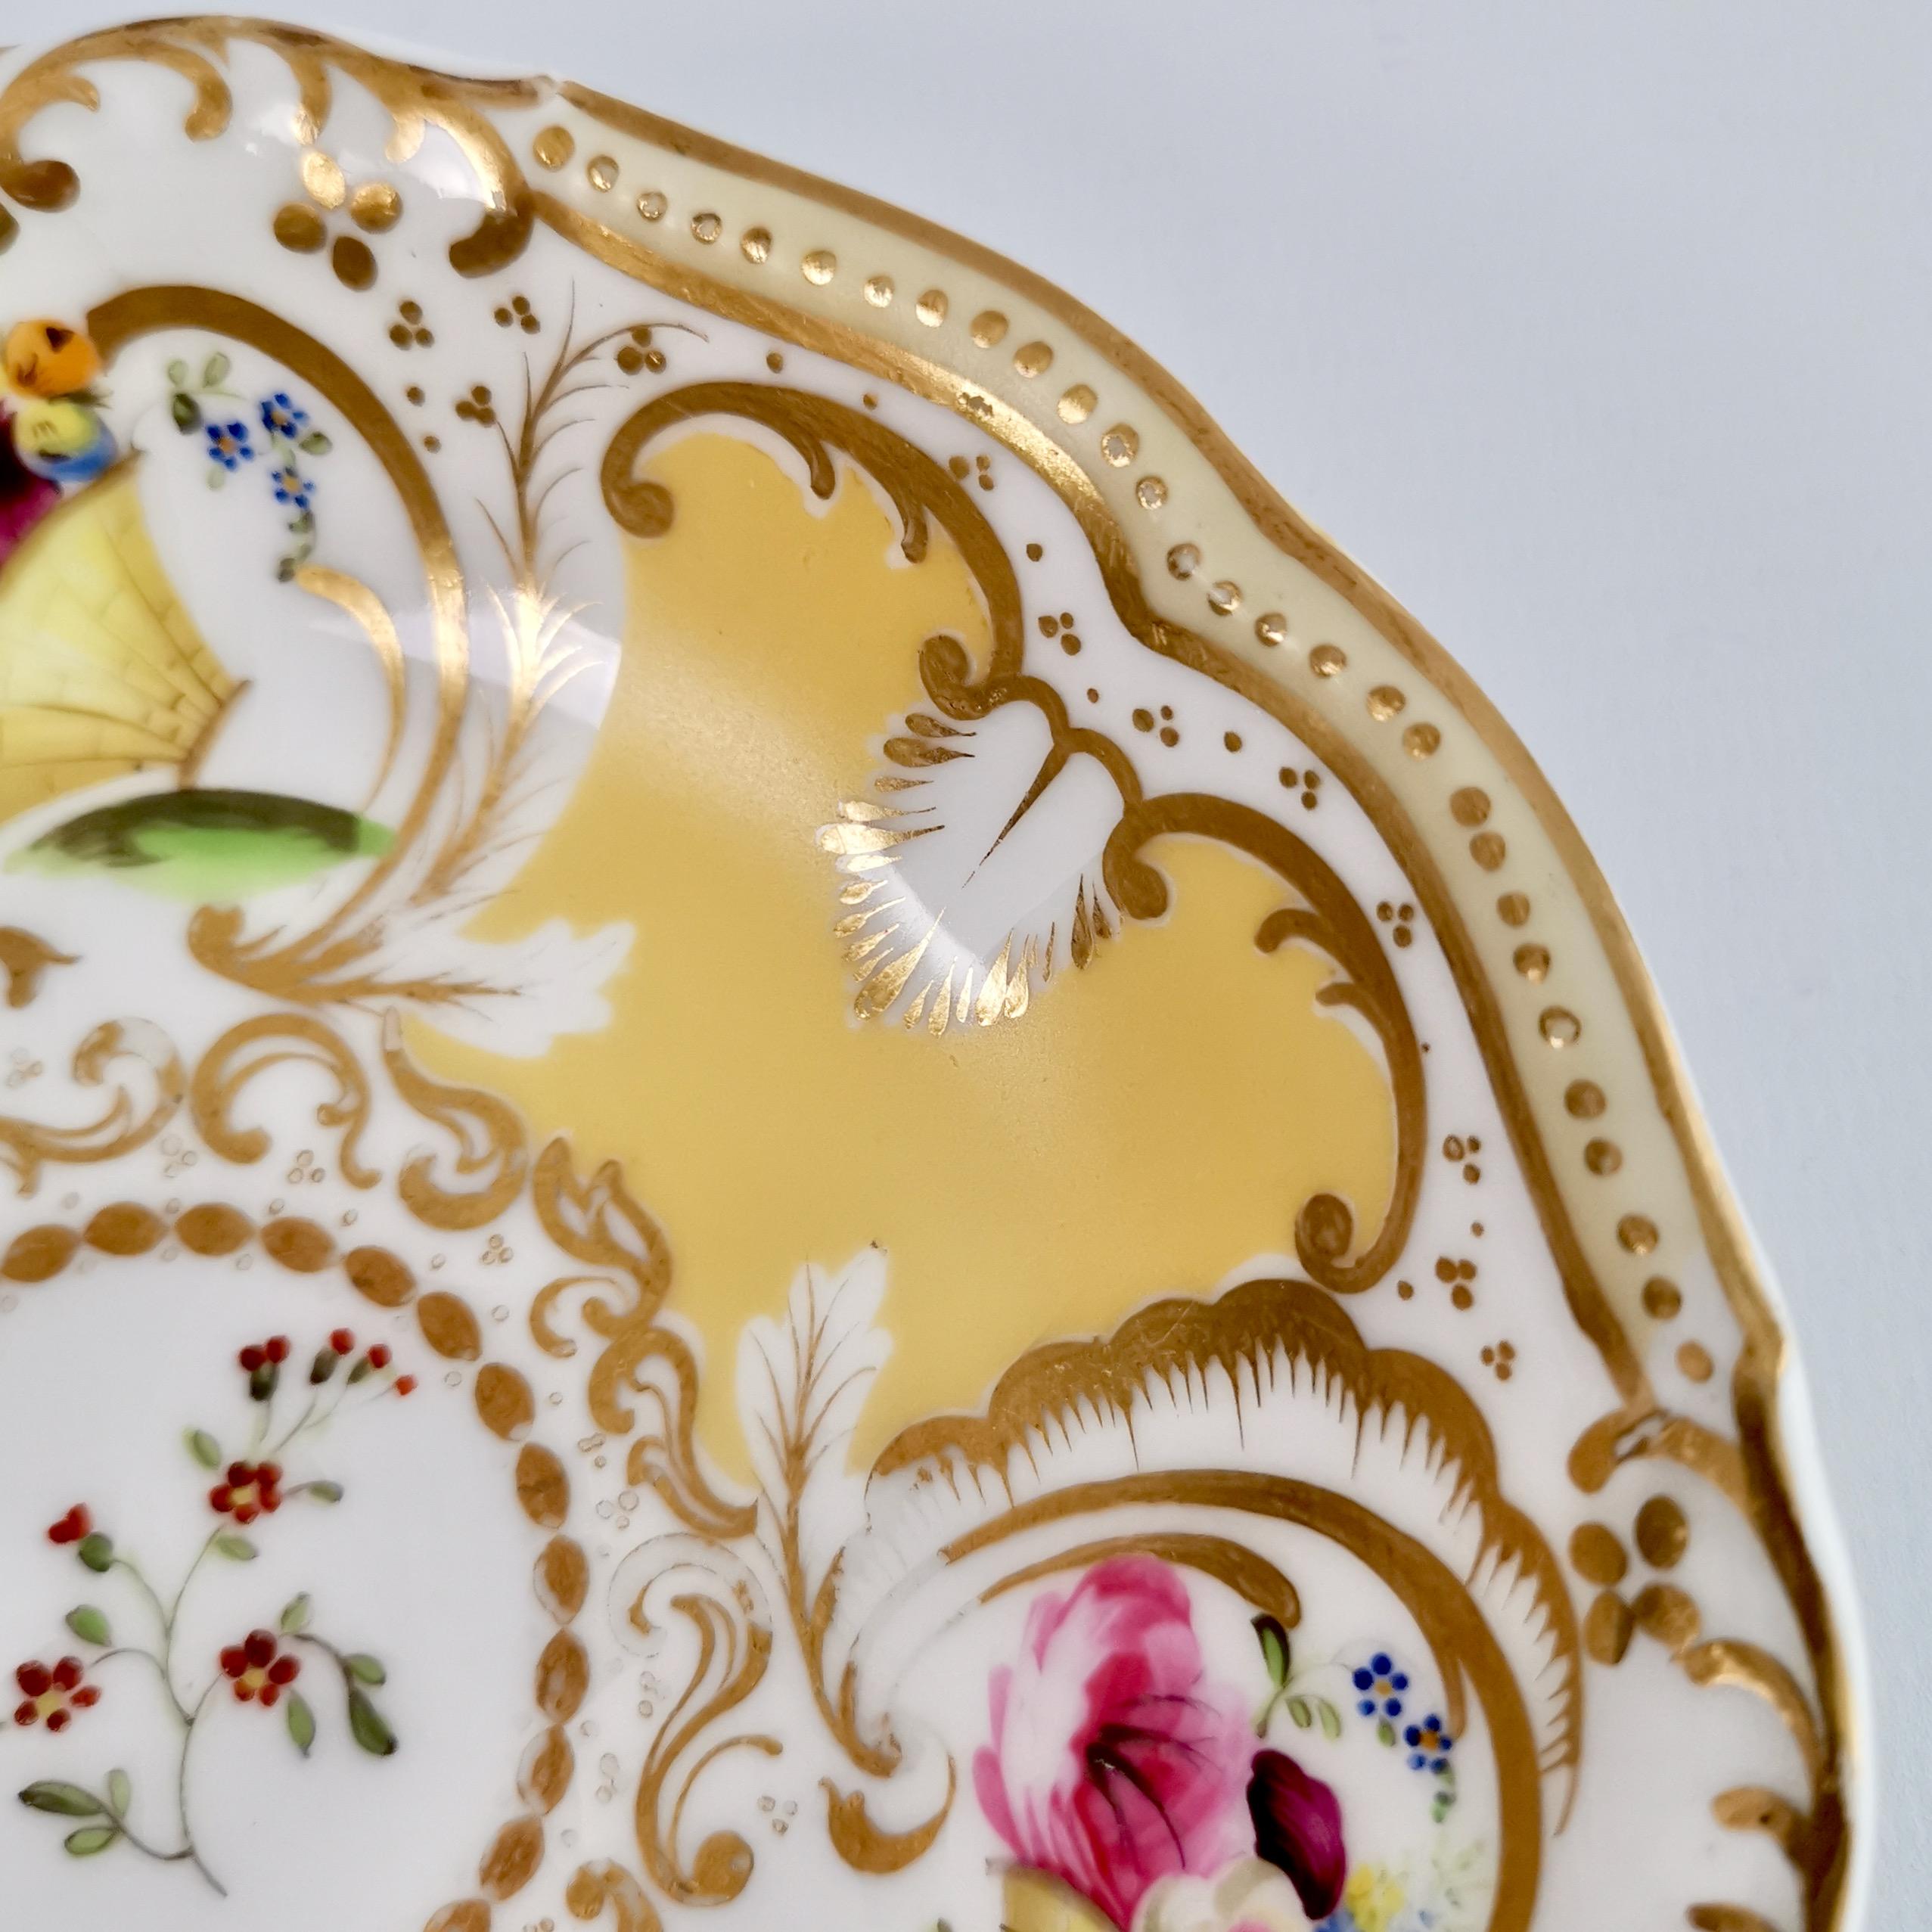 Grainger Worcester Teacup, Yellow, Gilt and Flowers, Rococo Revival, circa 1835 4